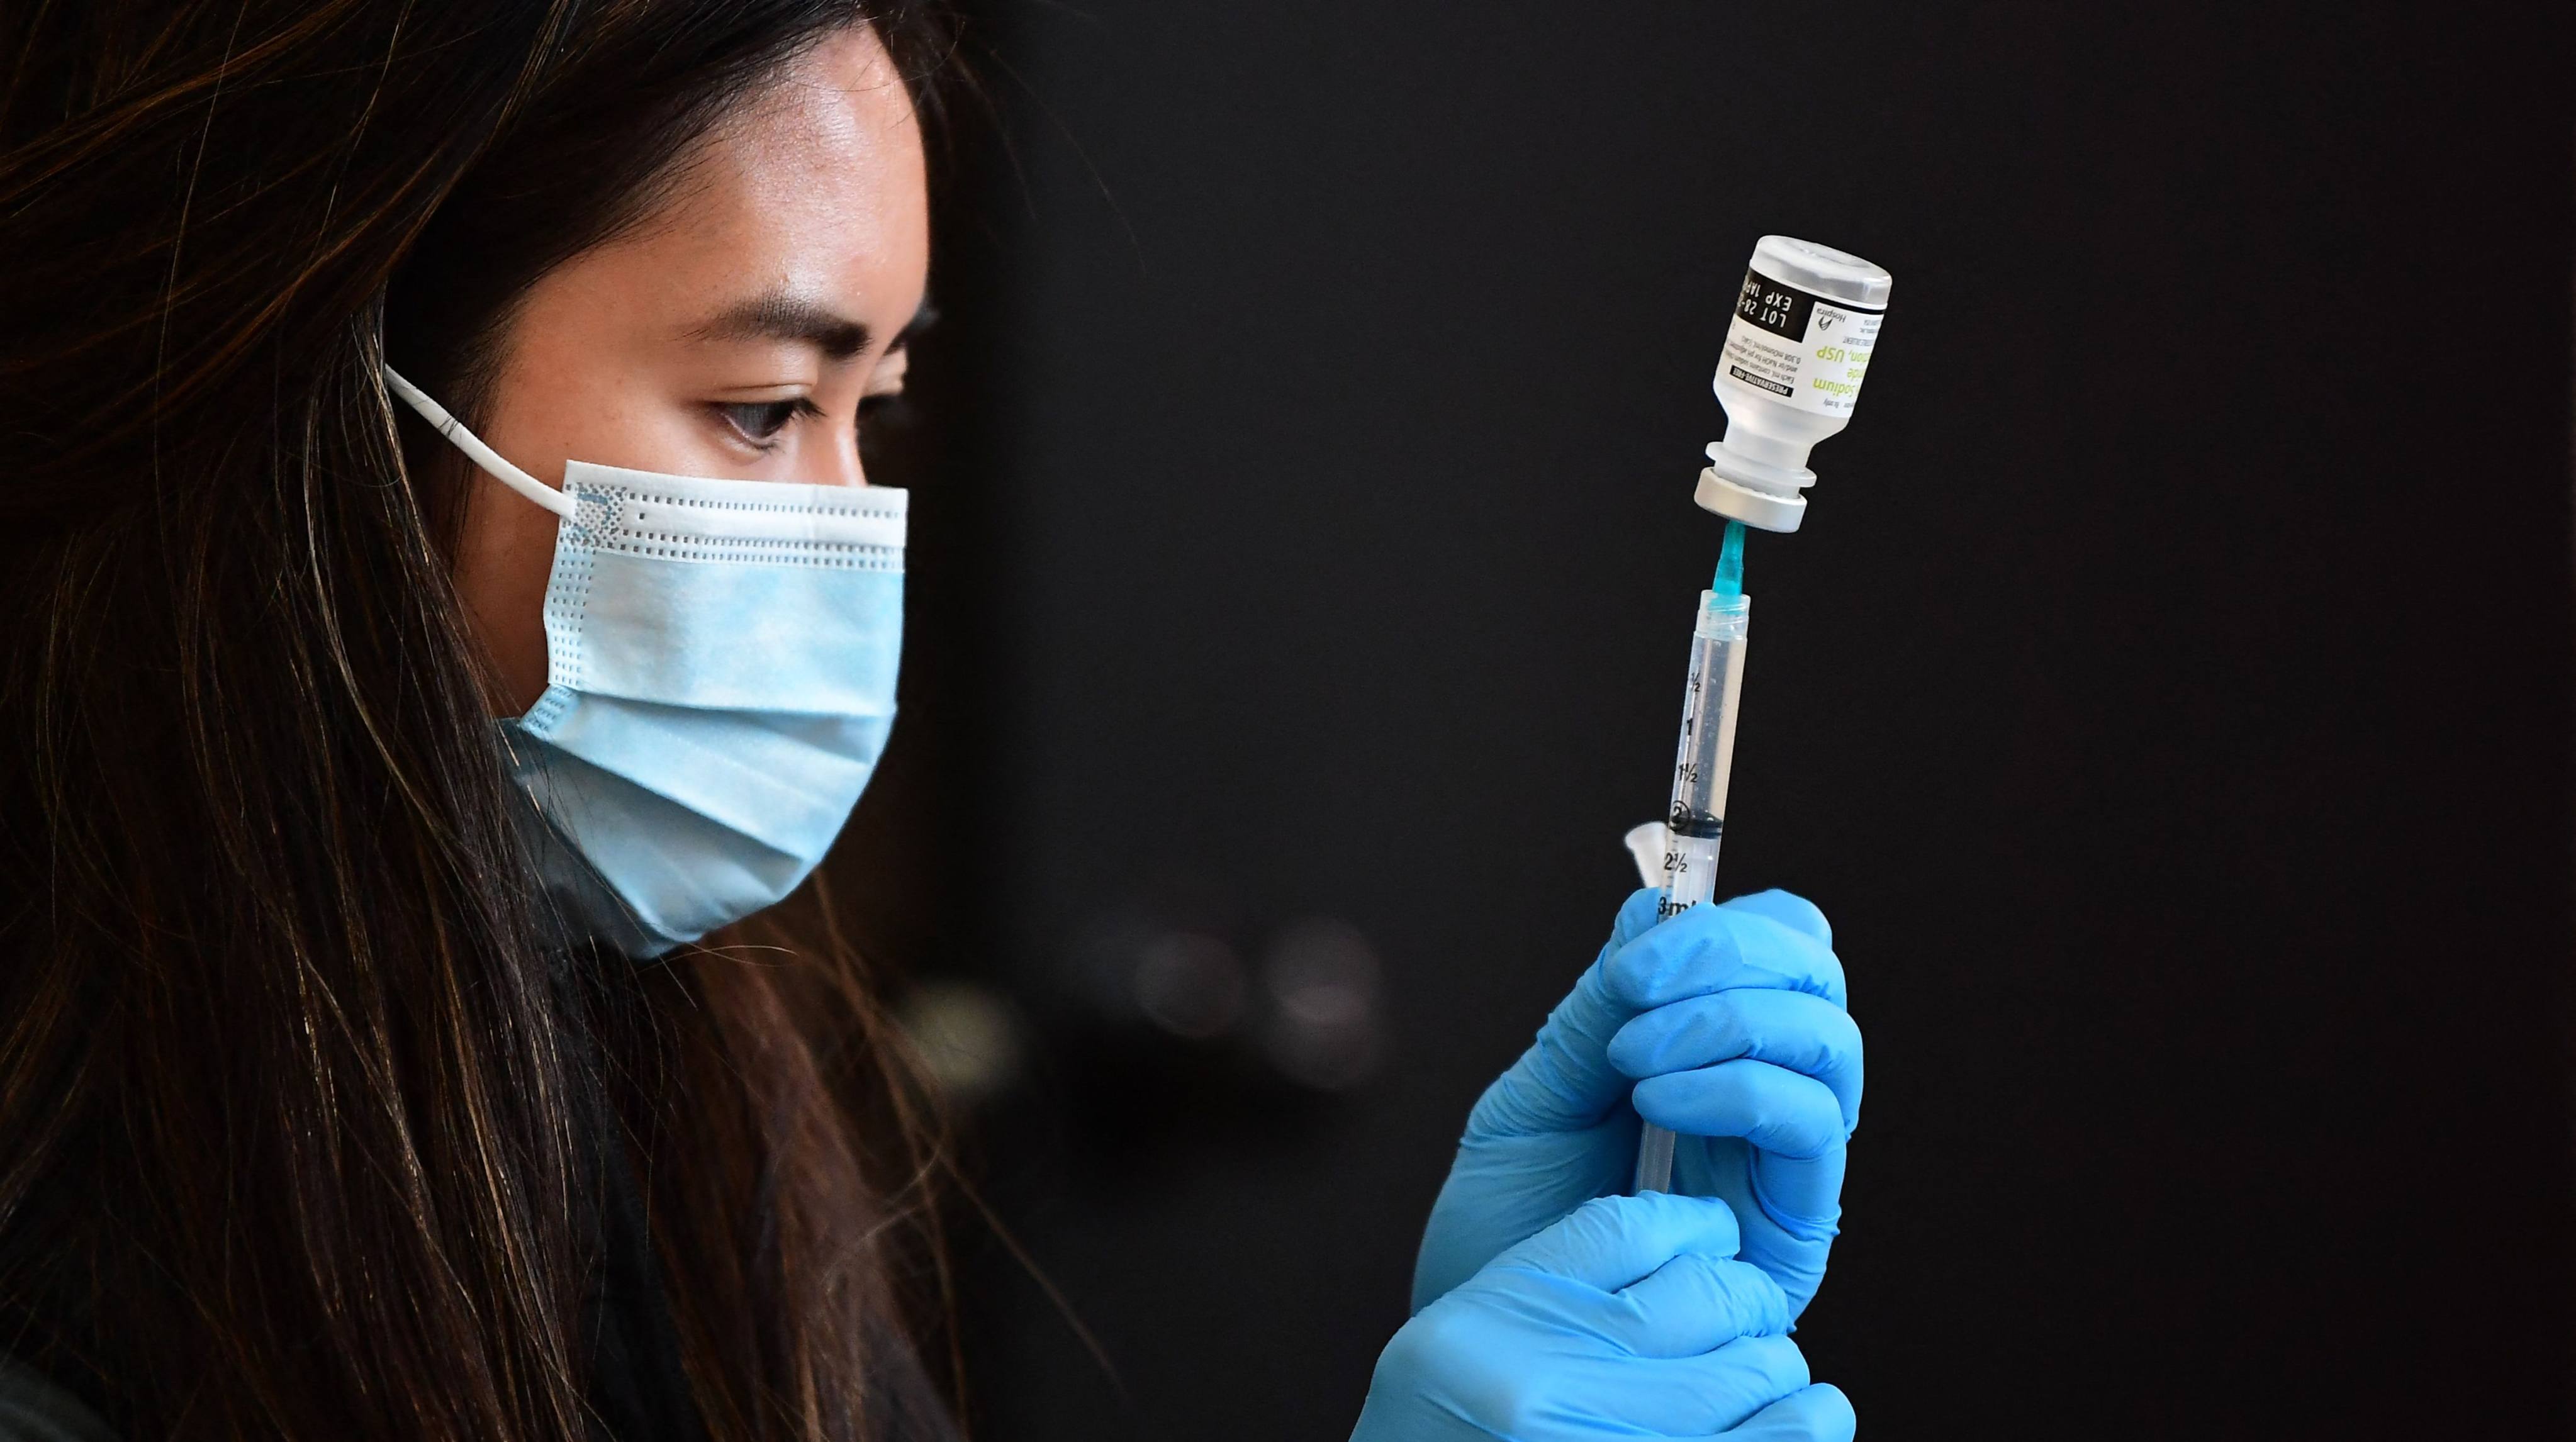 The US Food and Drug Administration told vaccine makers on June 30 that Covid boosters for this fall and winter should target the BA.4 and BA.5 Omicron strains. Photo: AFP